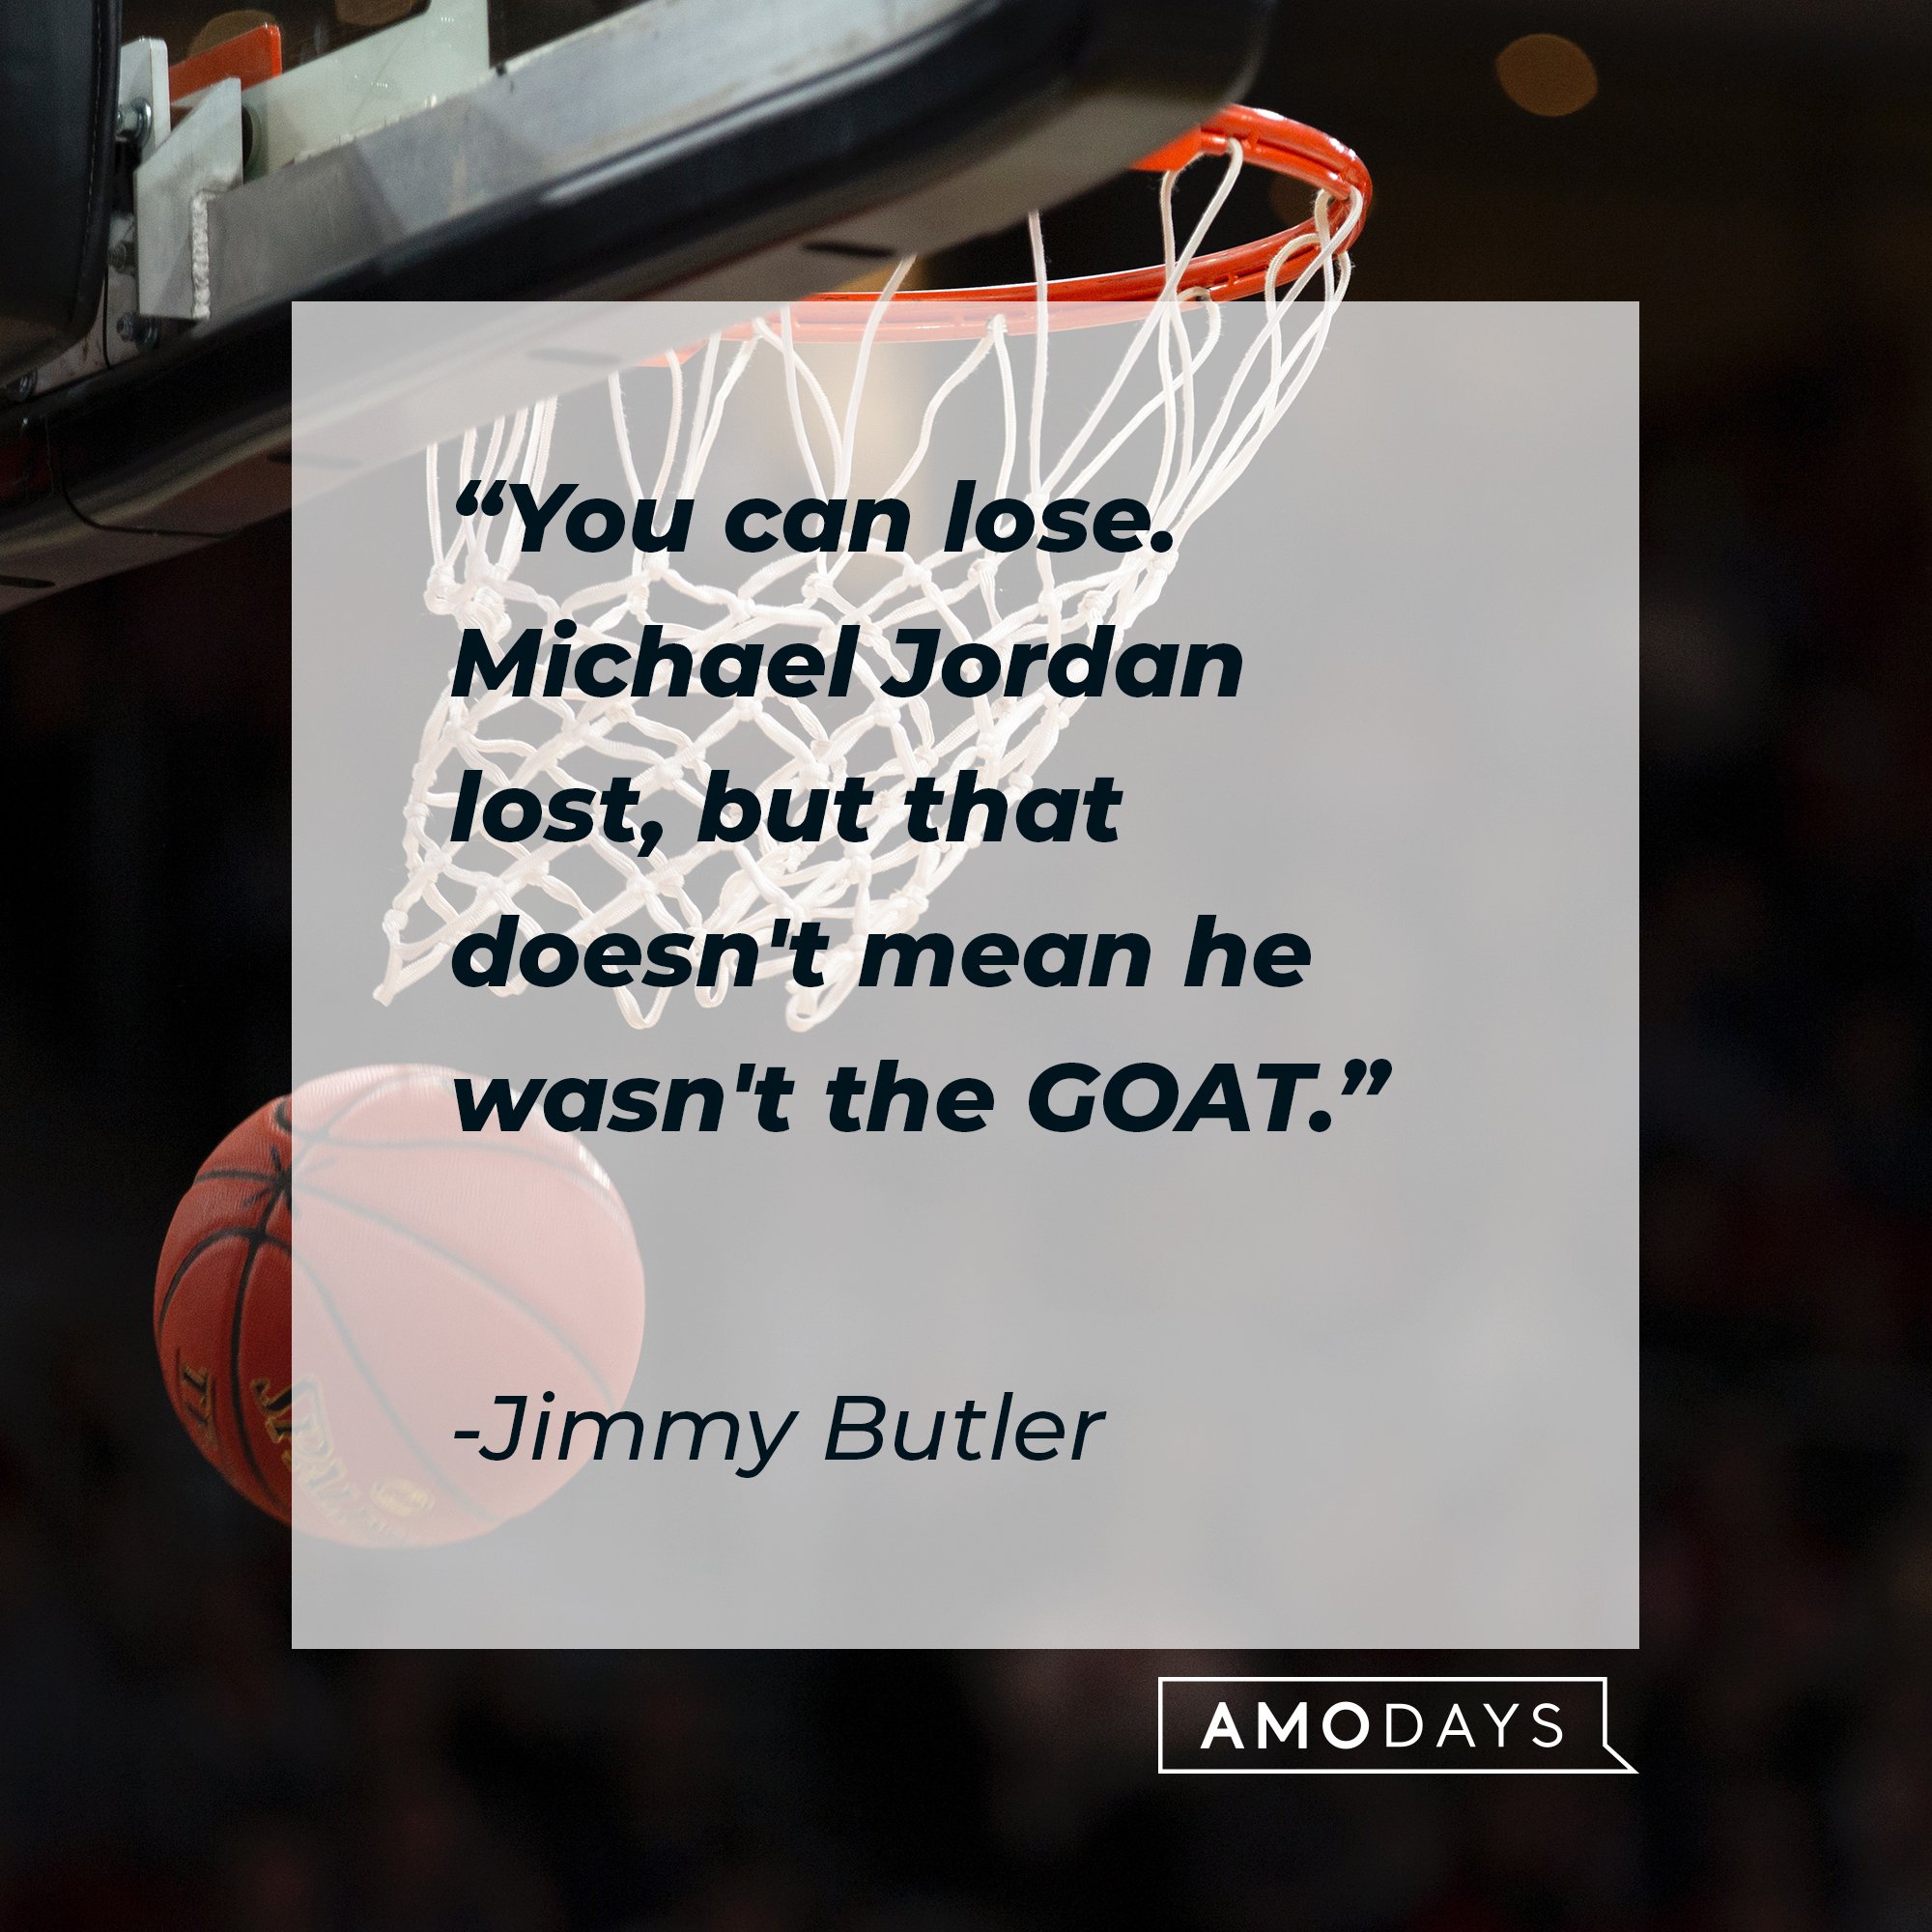 Jimmy Butler’s quote: "You can lose. Michael Jordan lost, but that doesn't mean he wasn't the GOAT." | Image: AmoDays 